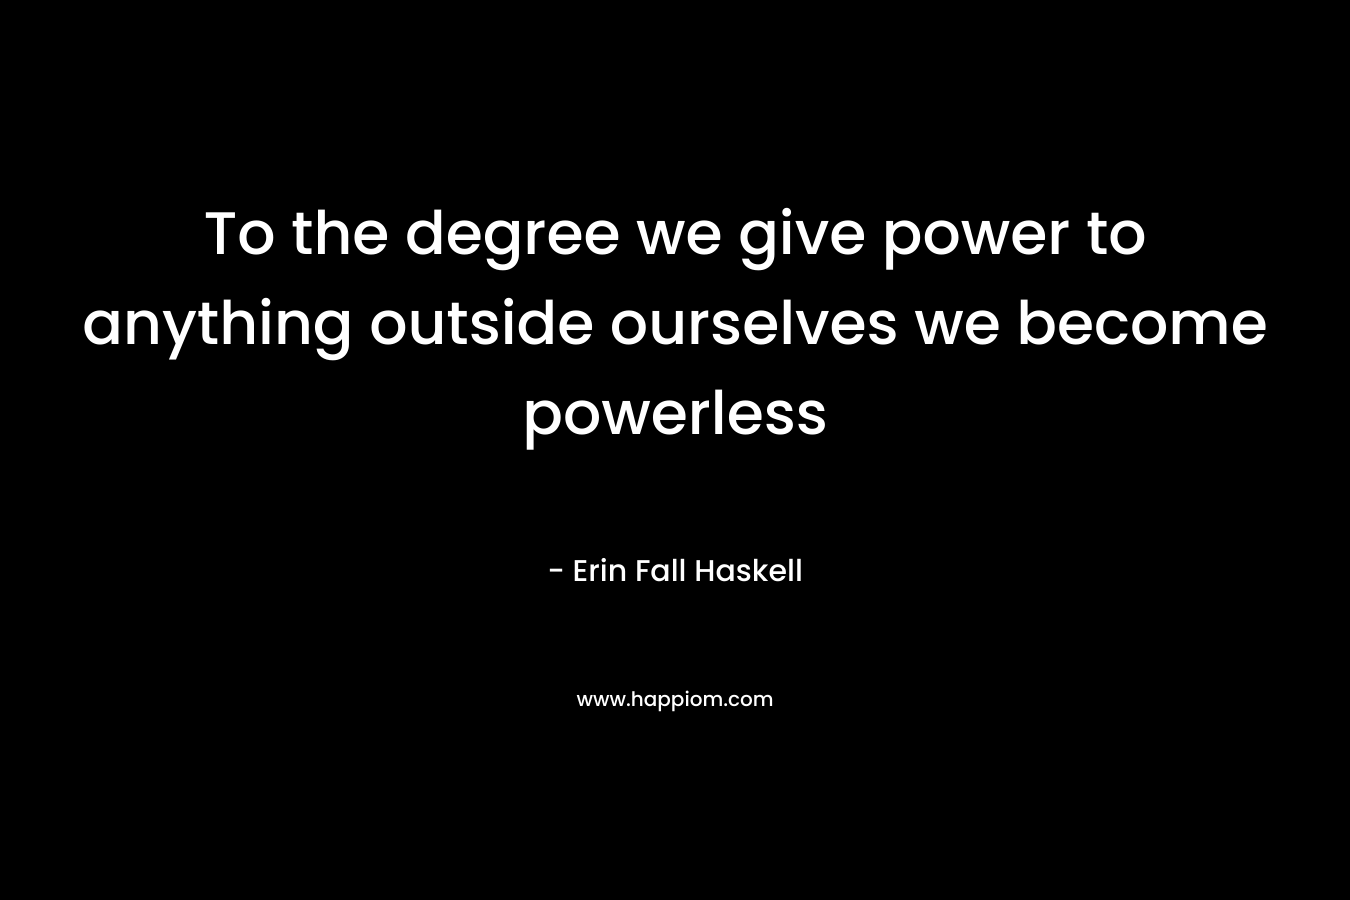 To the degree we give power to anything outside ourselves we become powerless